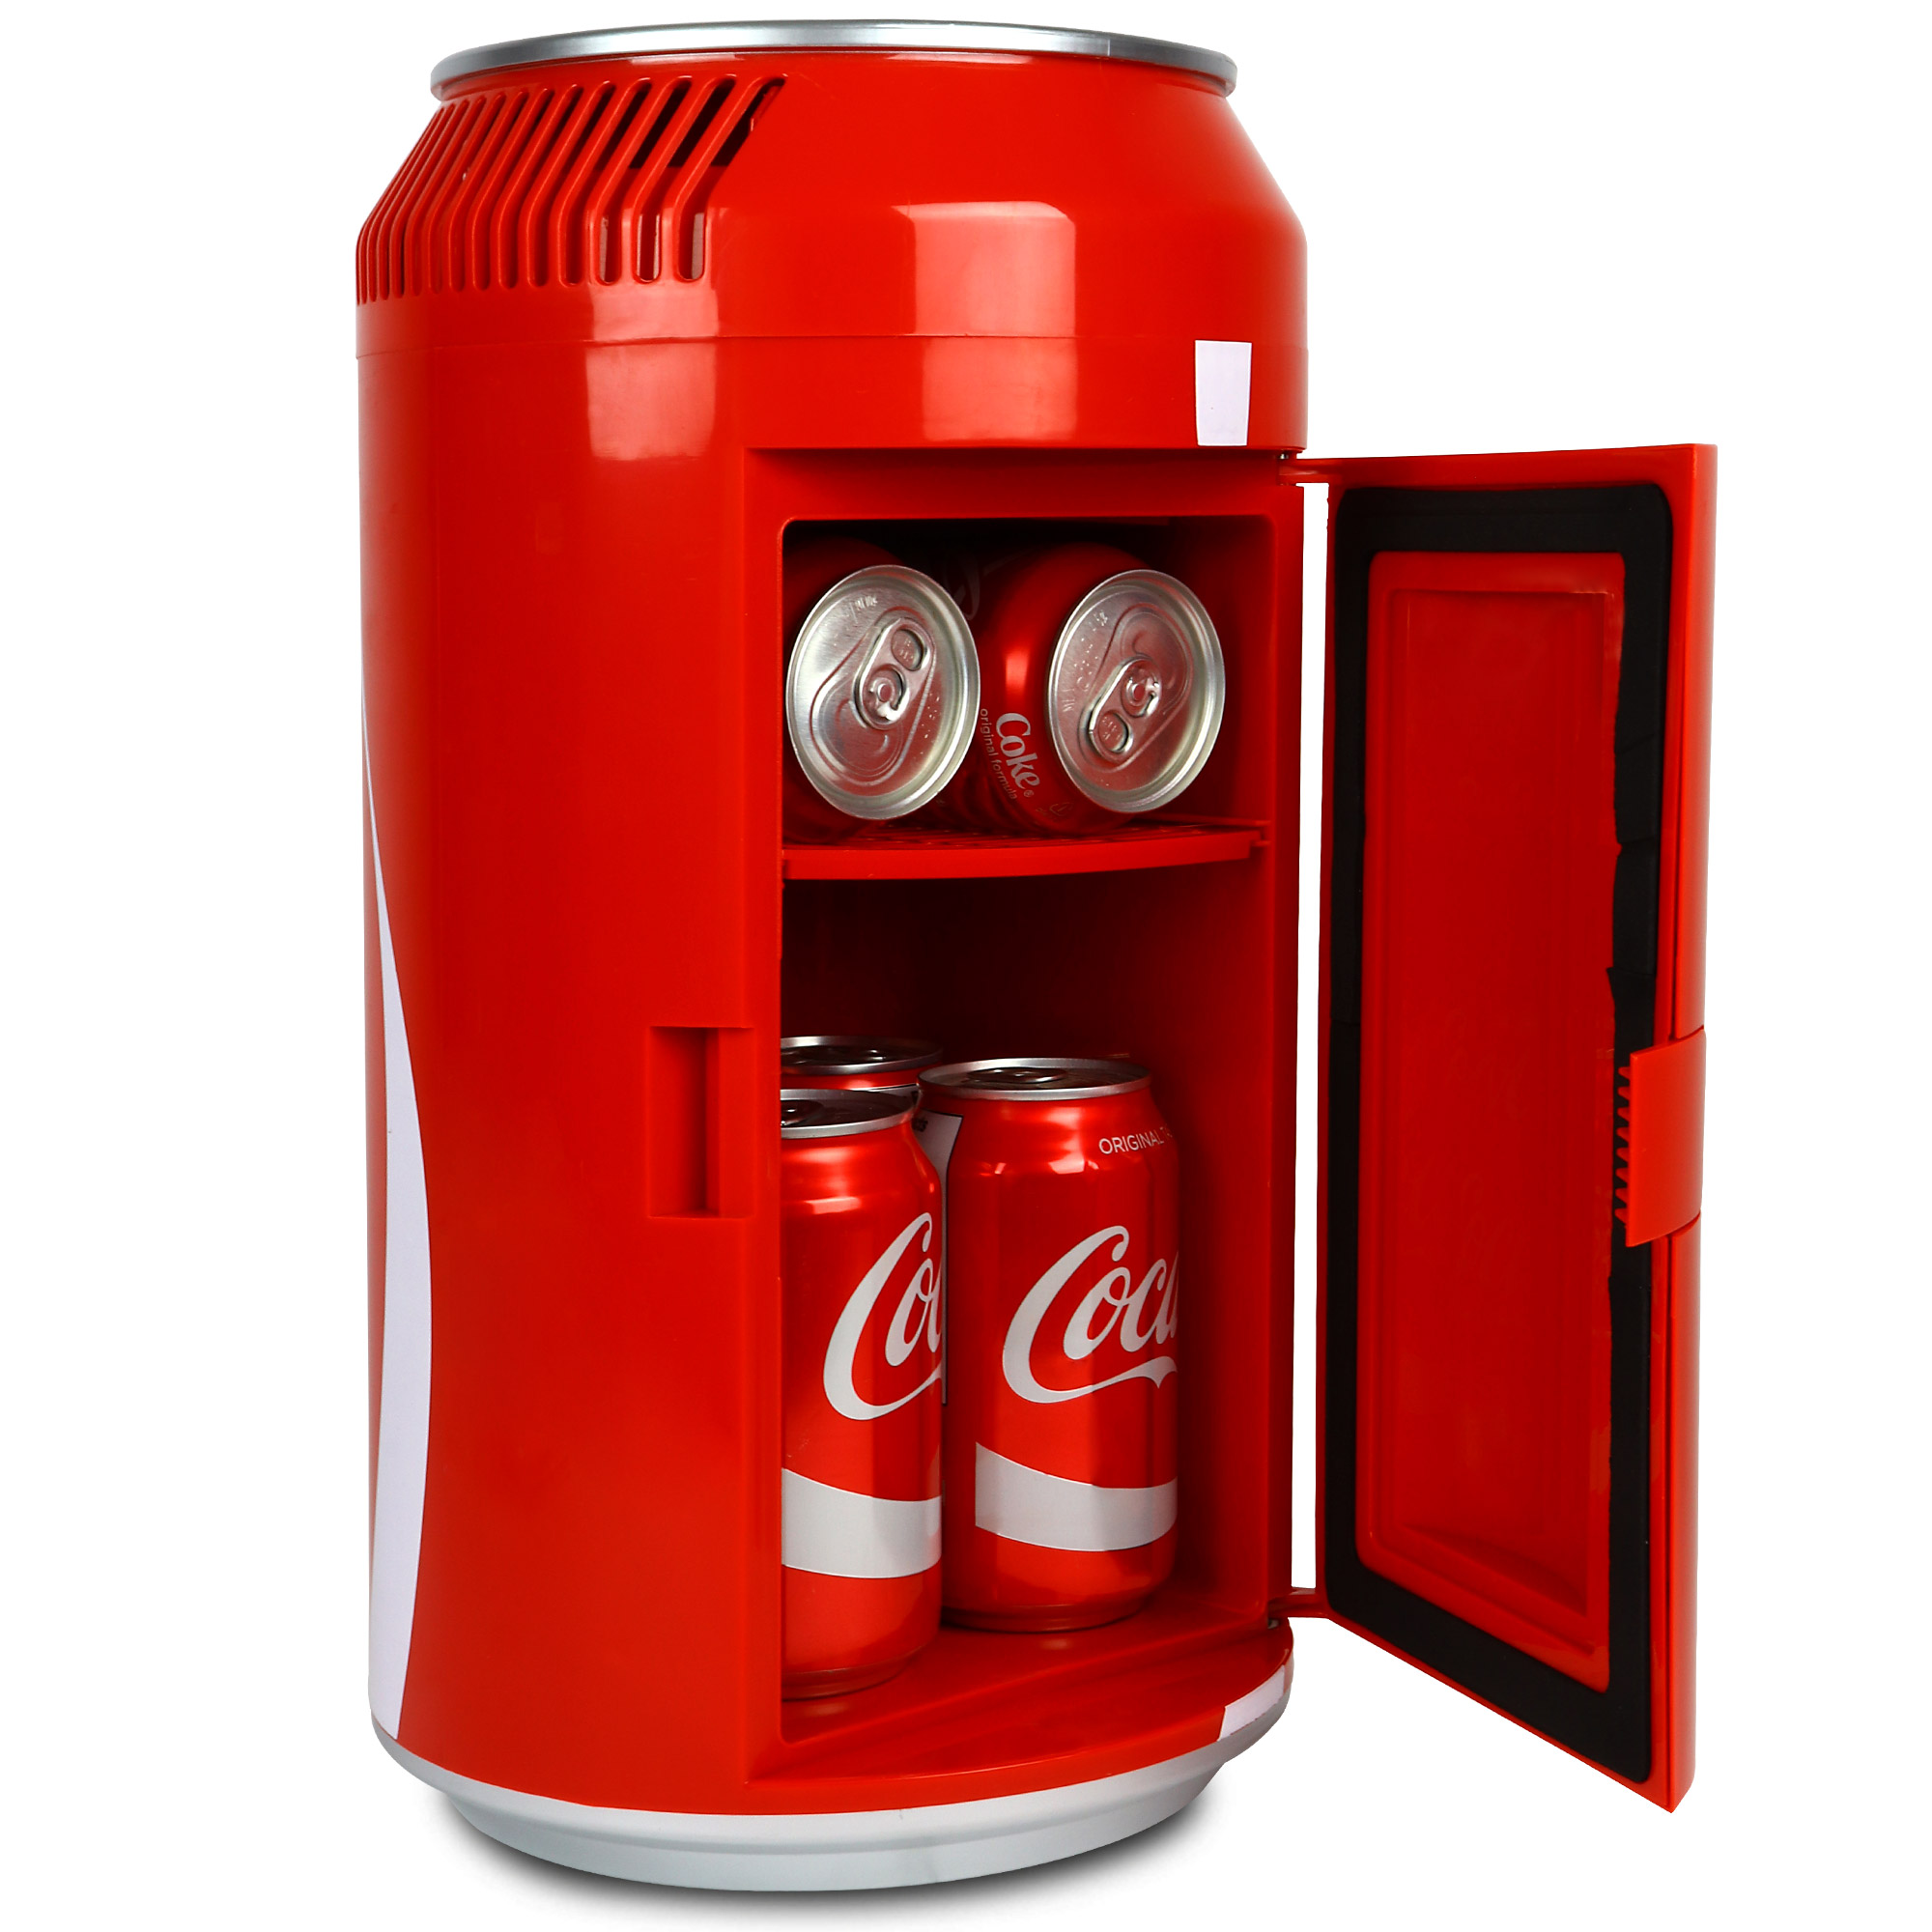 Coca-Cola 8 Can Portable Mini Fridge, 5.4L (5.7 qt) Compact Personal Travel Fridge for Snacks Lunch Drinks Cosmetics, Includes 12V and AC Cords, Cute Desk Accessory for Home Office Dorm Travel, Red - image 3 of 8